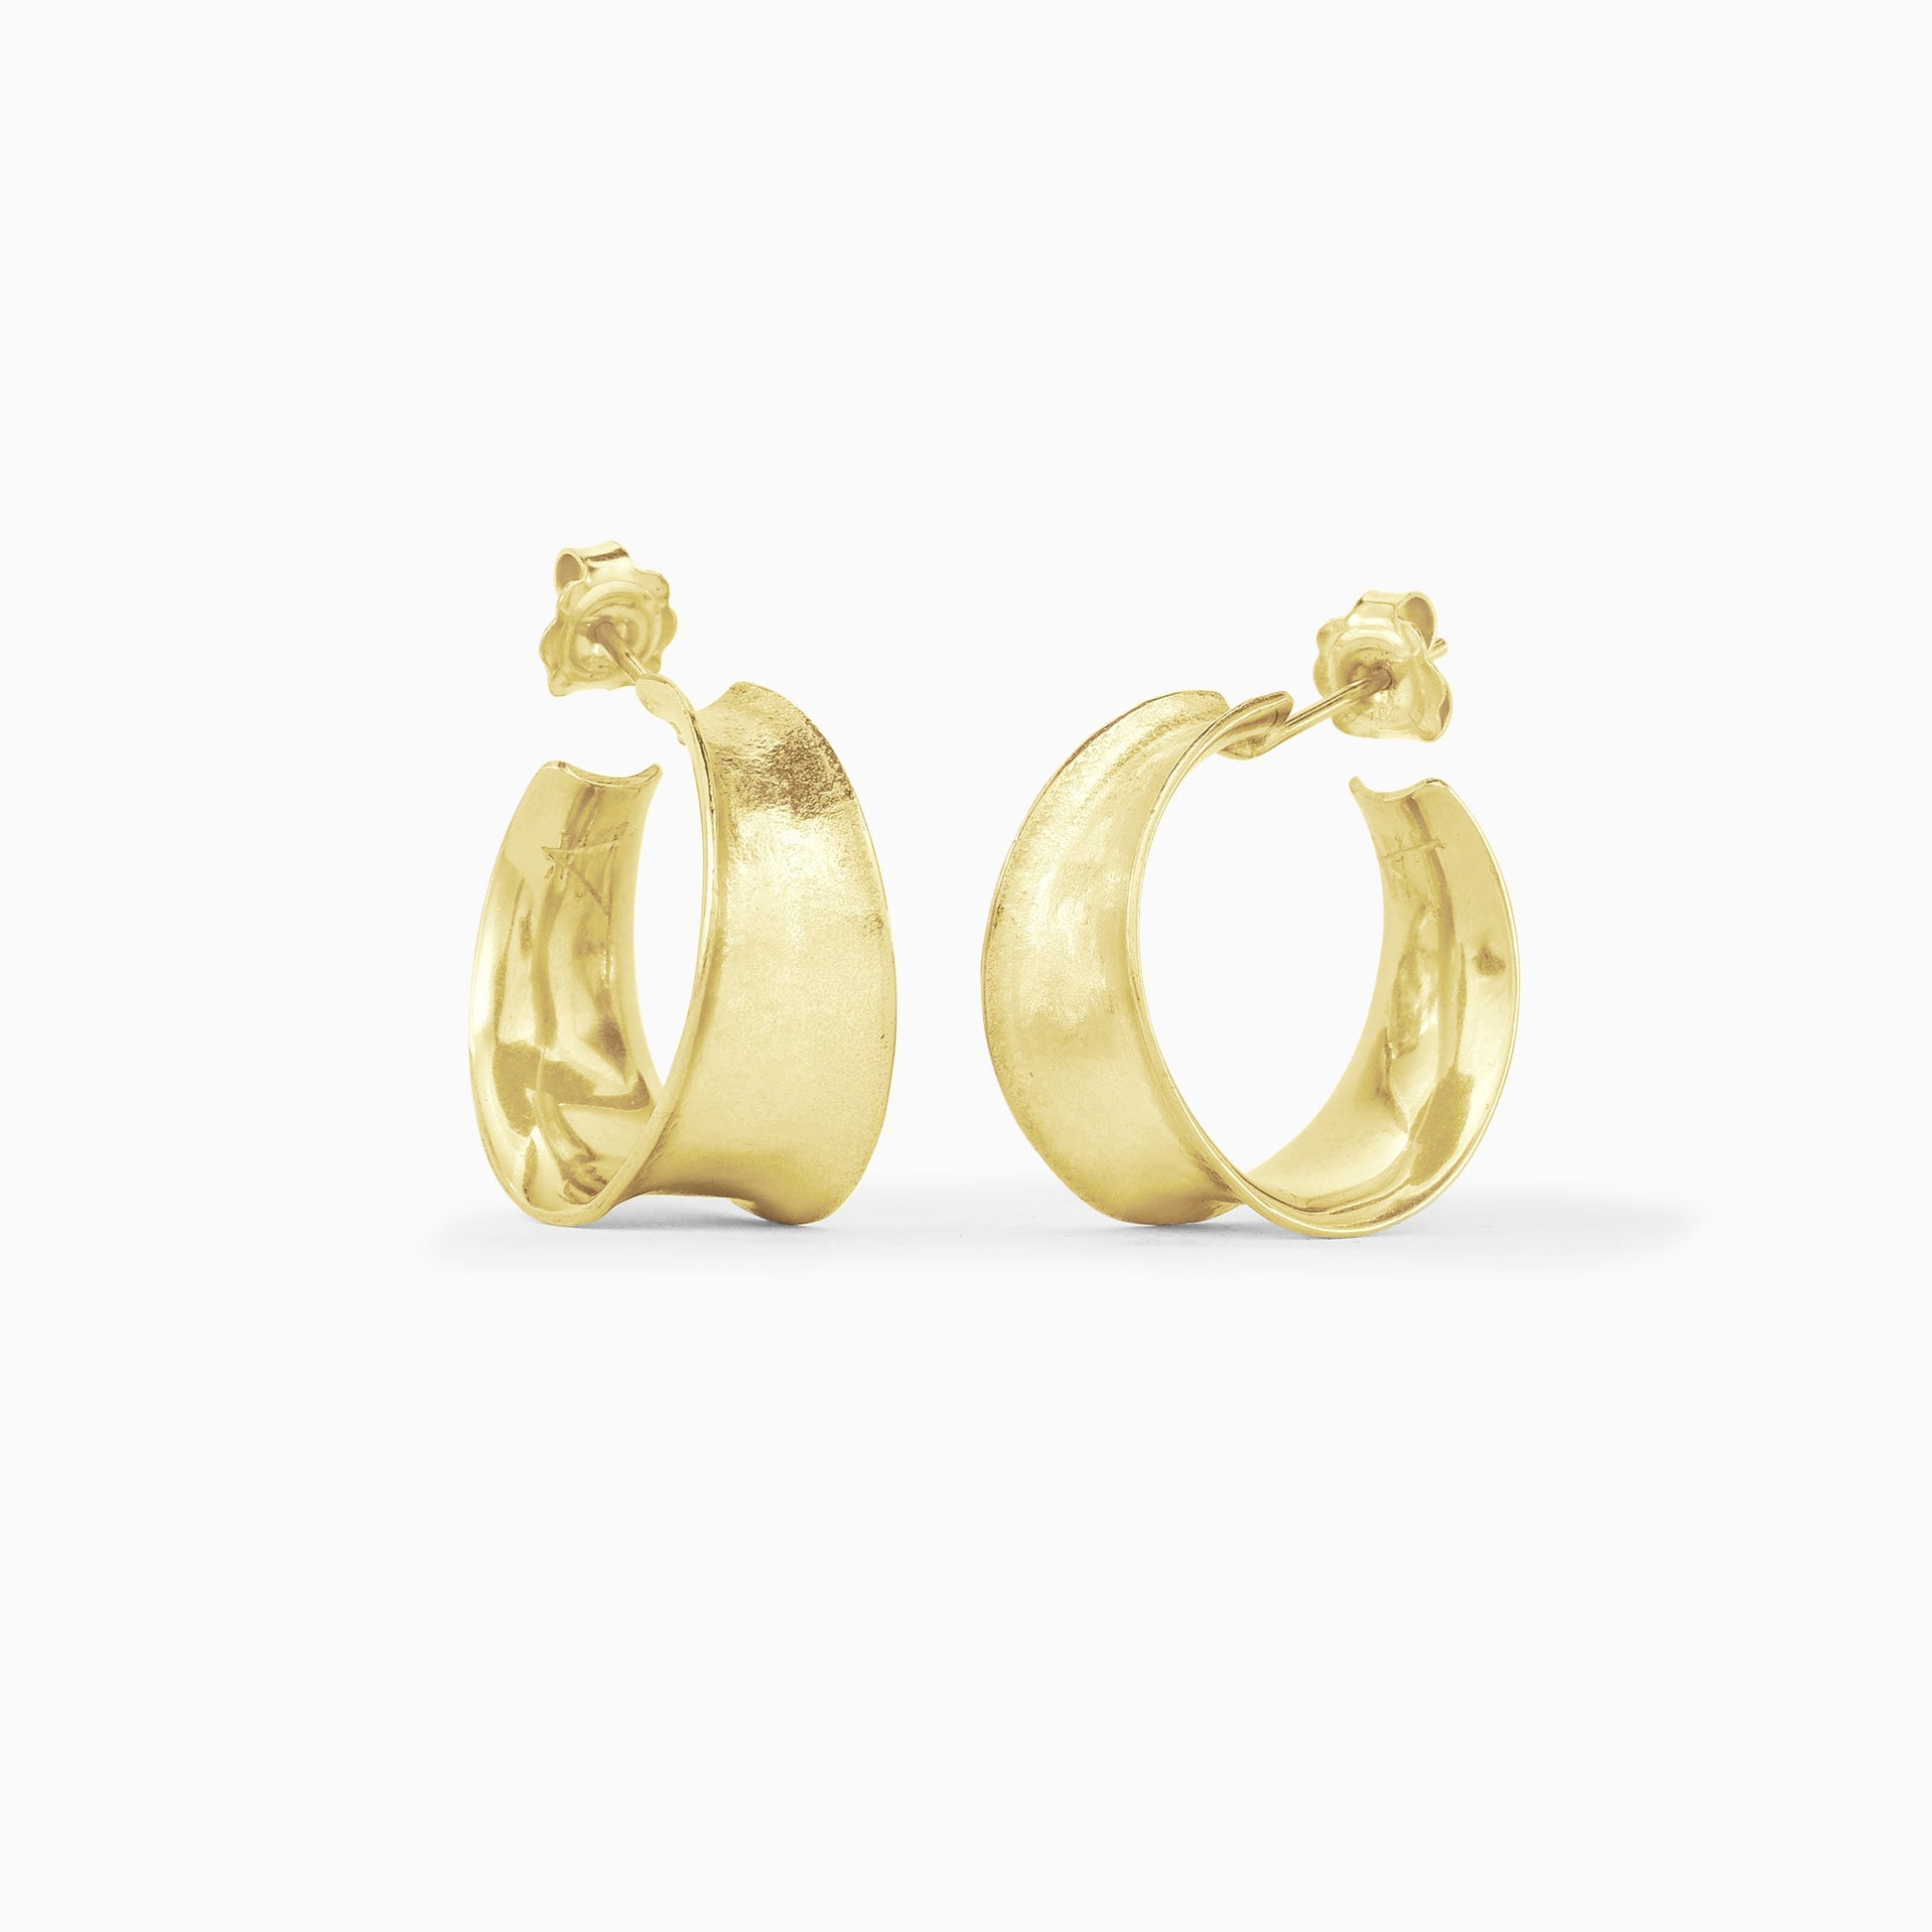 A pair of 18ct Fairtrade yellow gold round hoop earrings tapering in width from 11mm at the bottom to 6mm at the top. Gentle organic texture and form, concave outer surface. 24mm outside diameter with a stud fastening.